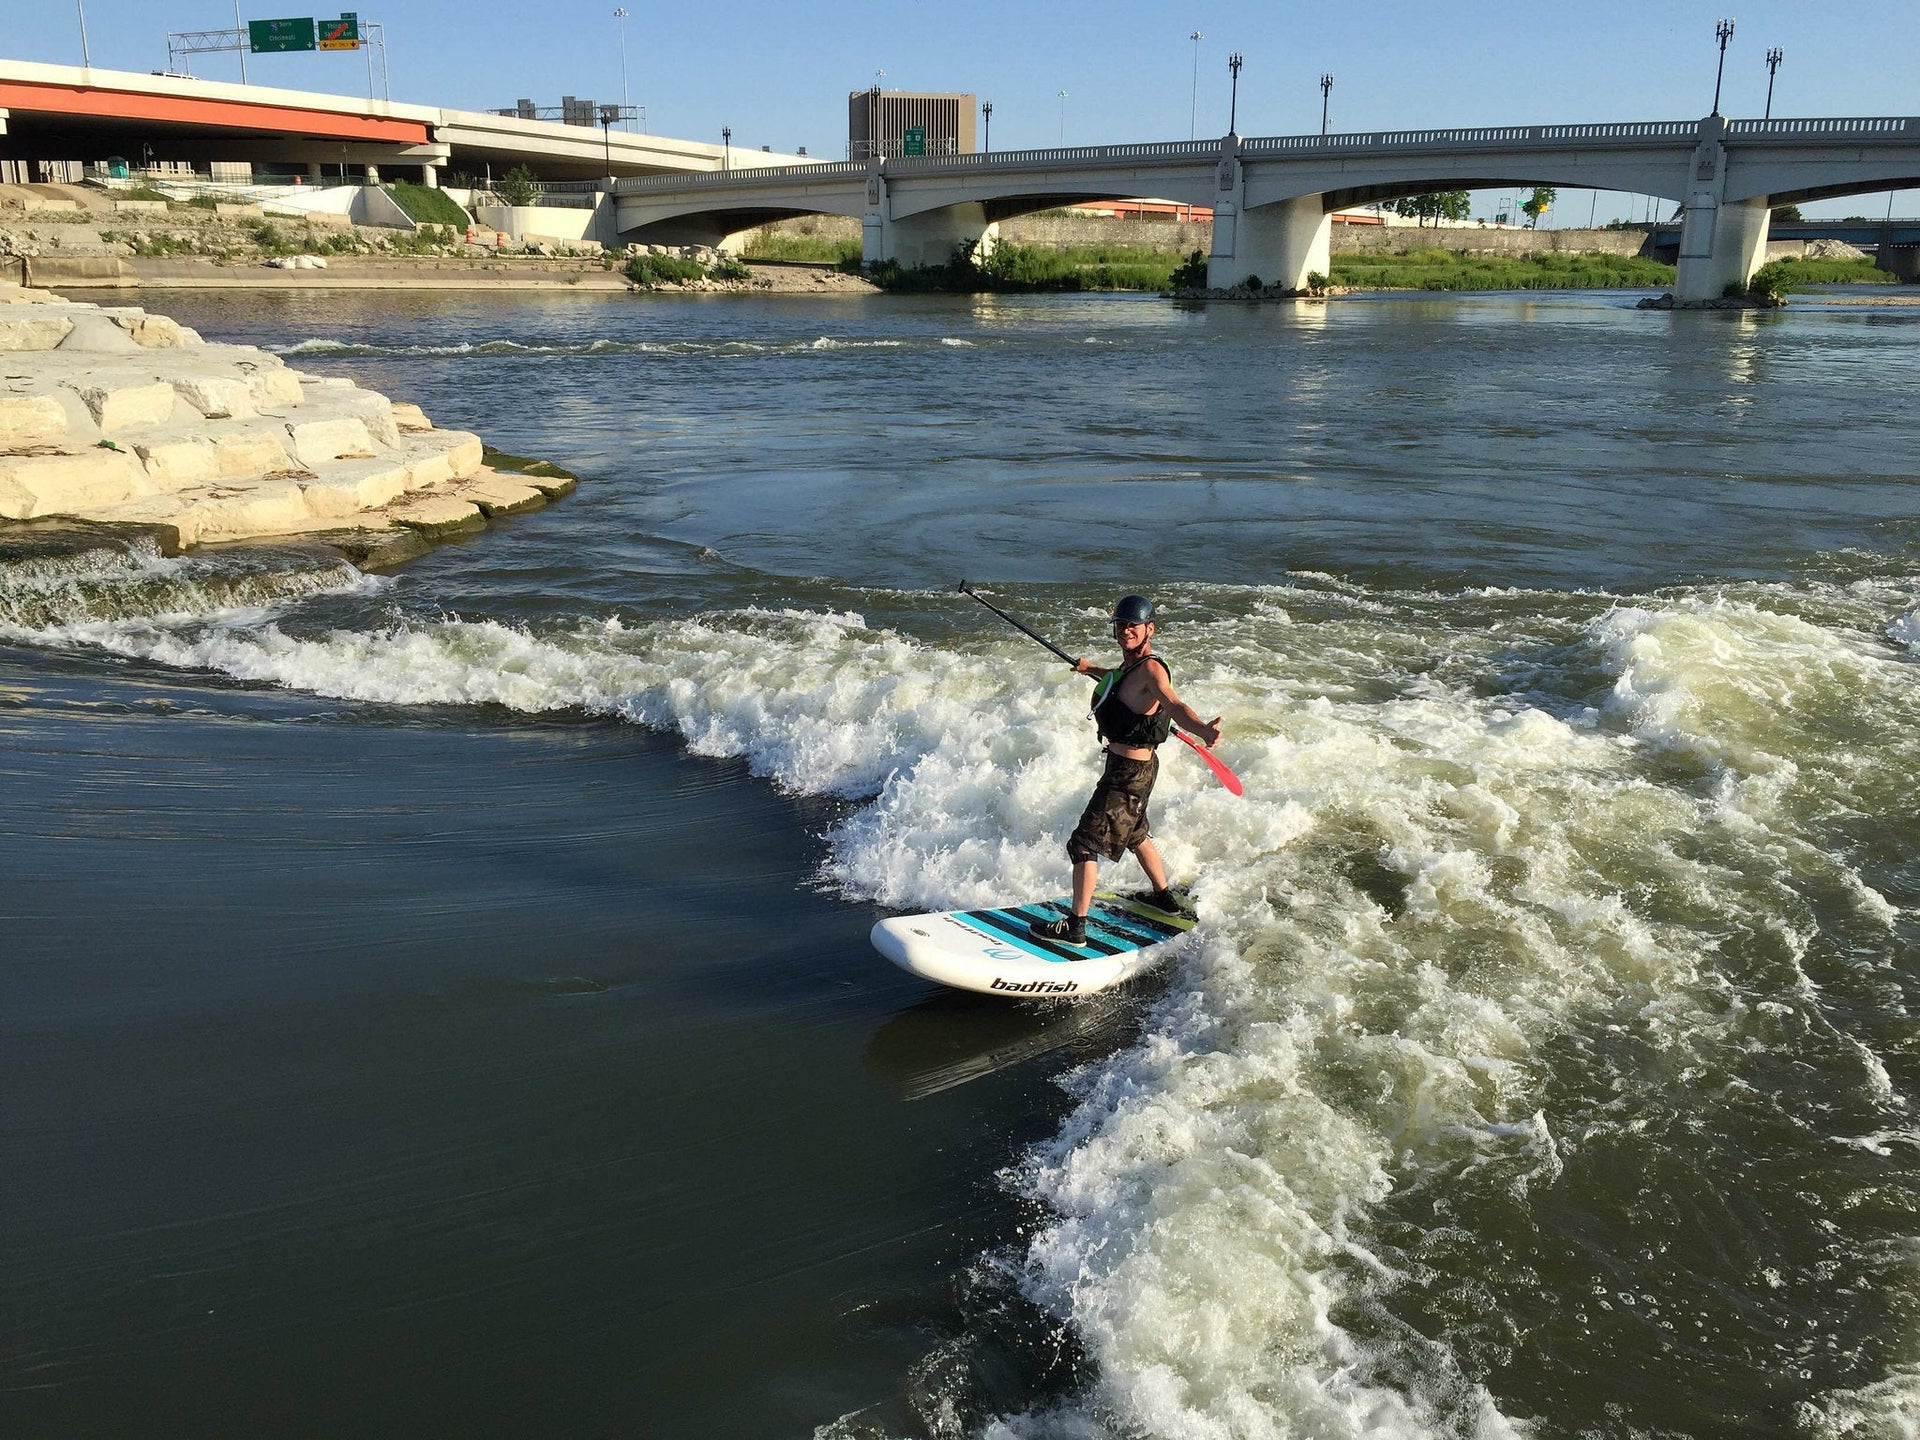 How to Start Planning a River Wave in your Hometown